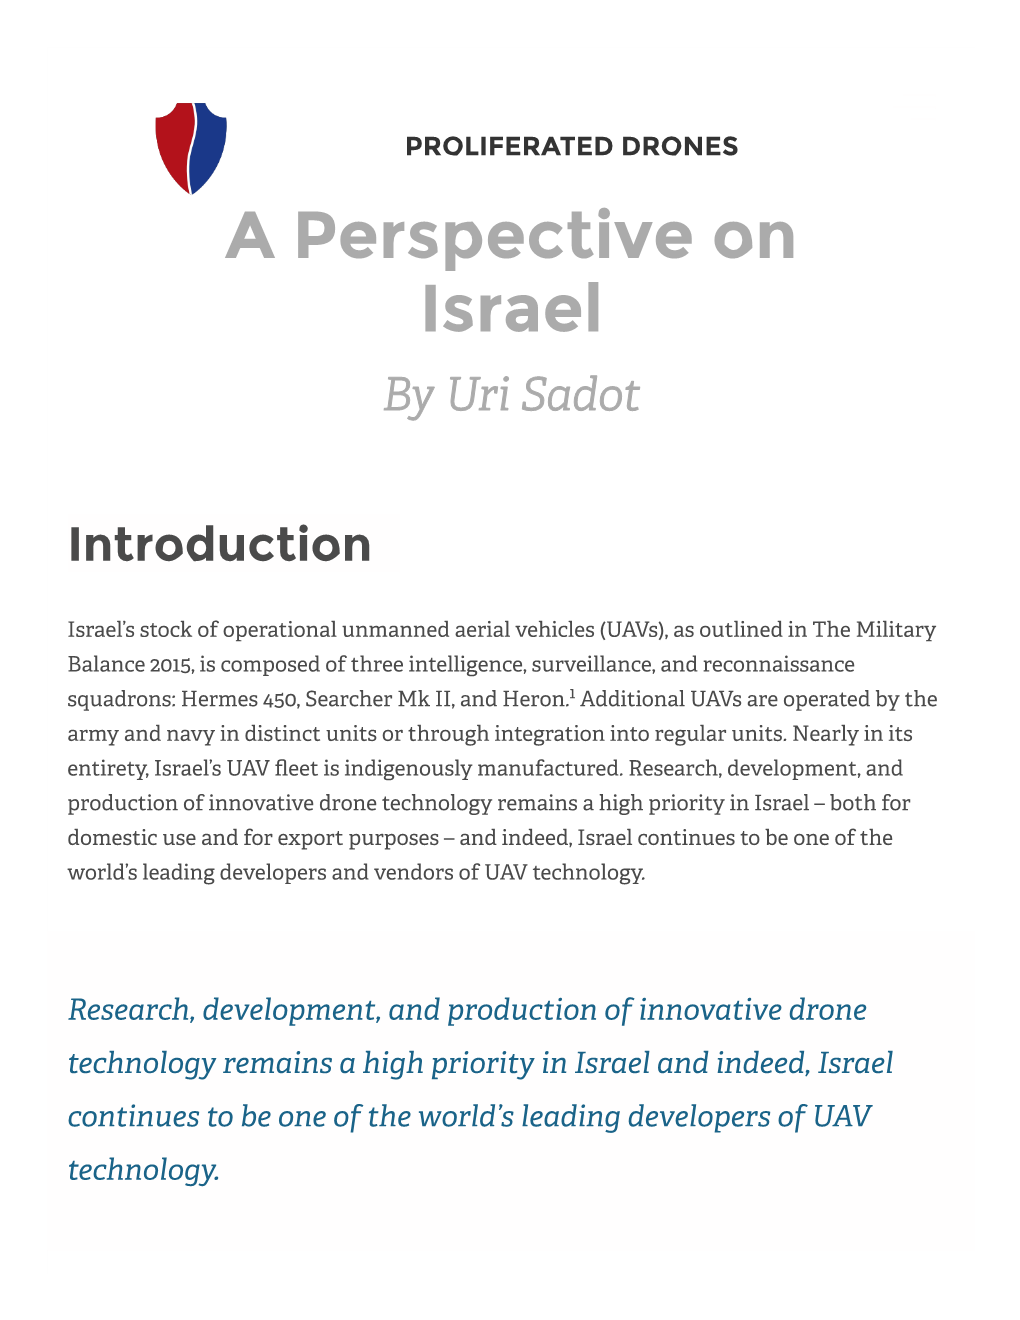 A Perspective on Israel by Uri Sadot